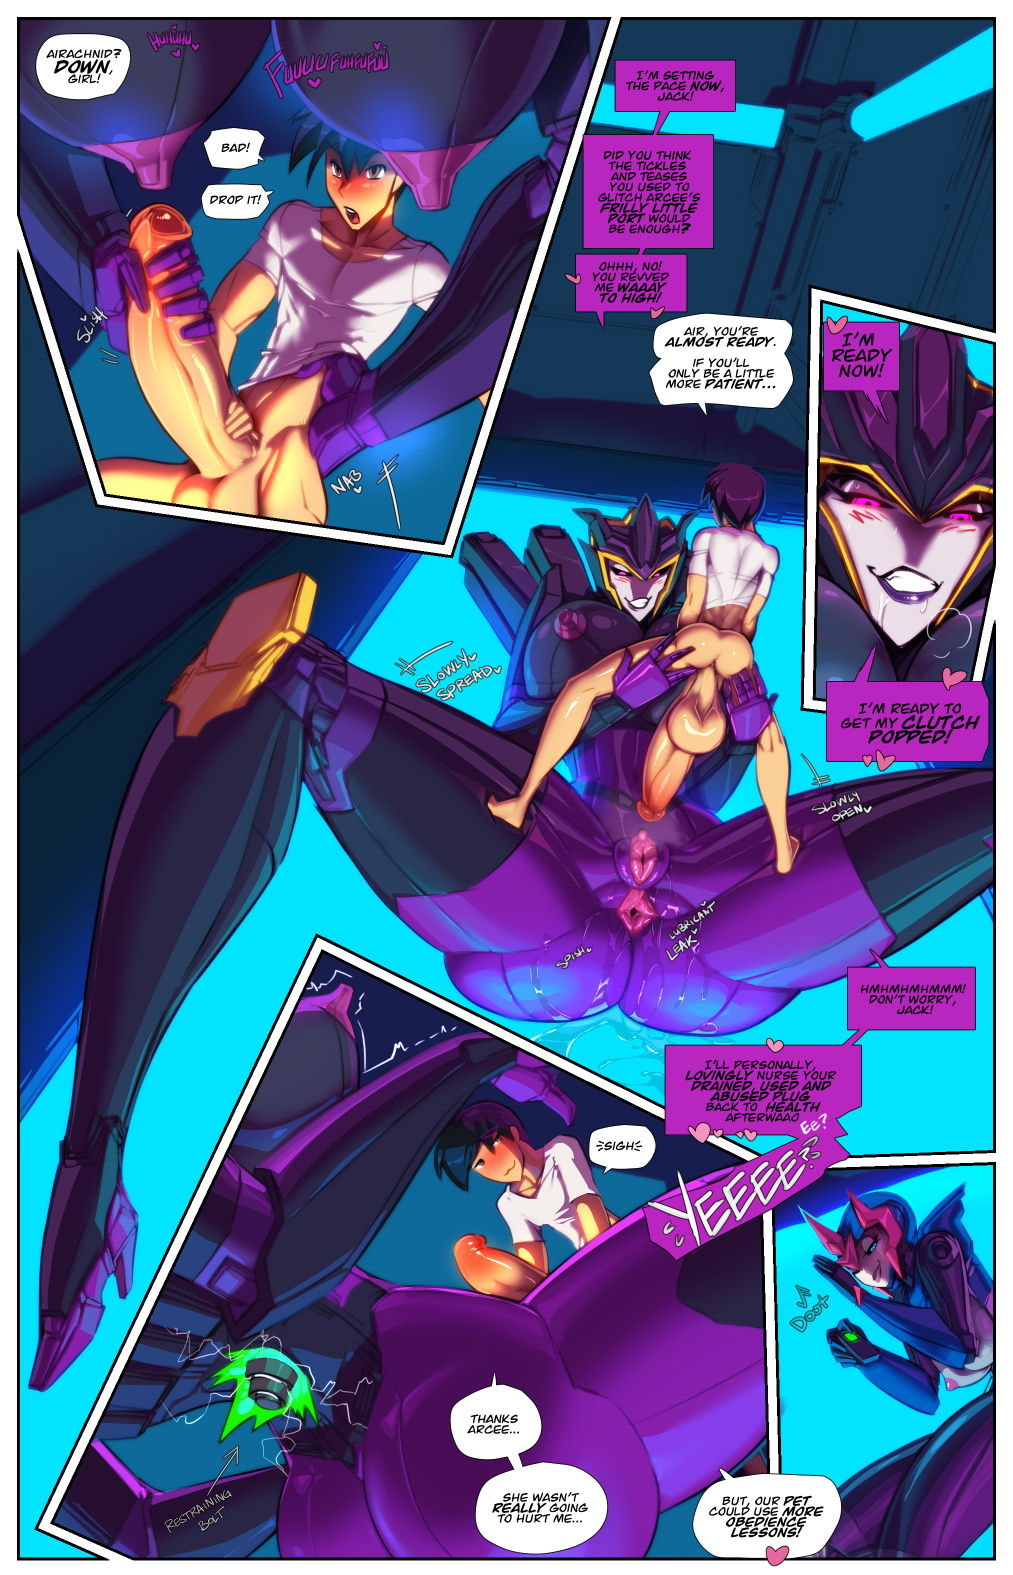 The Full Course? - Page 7